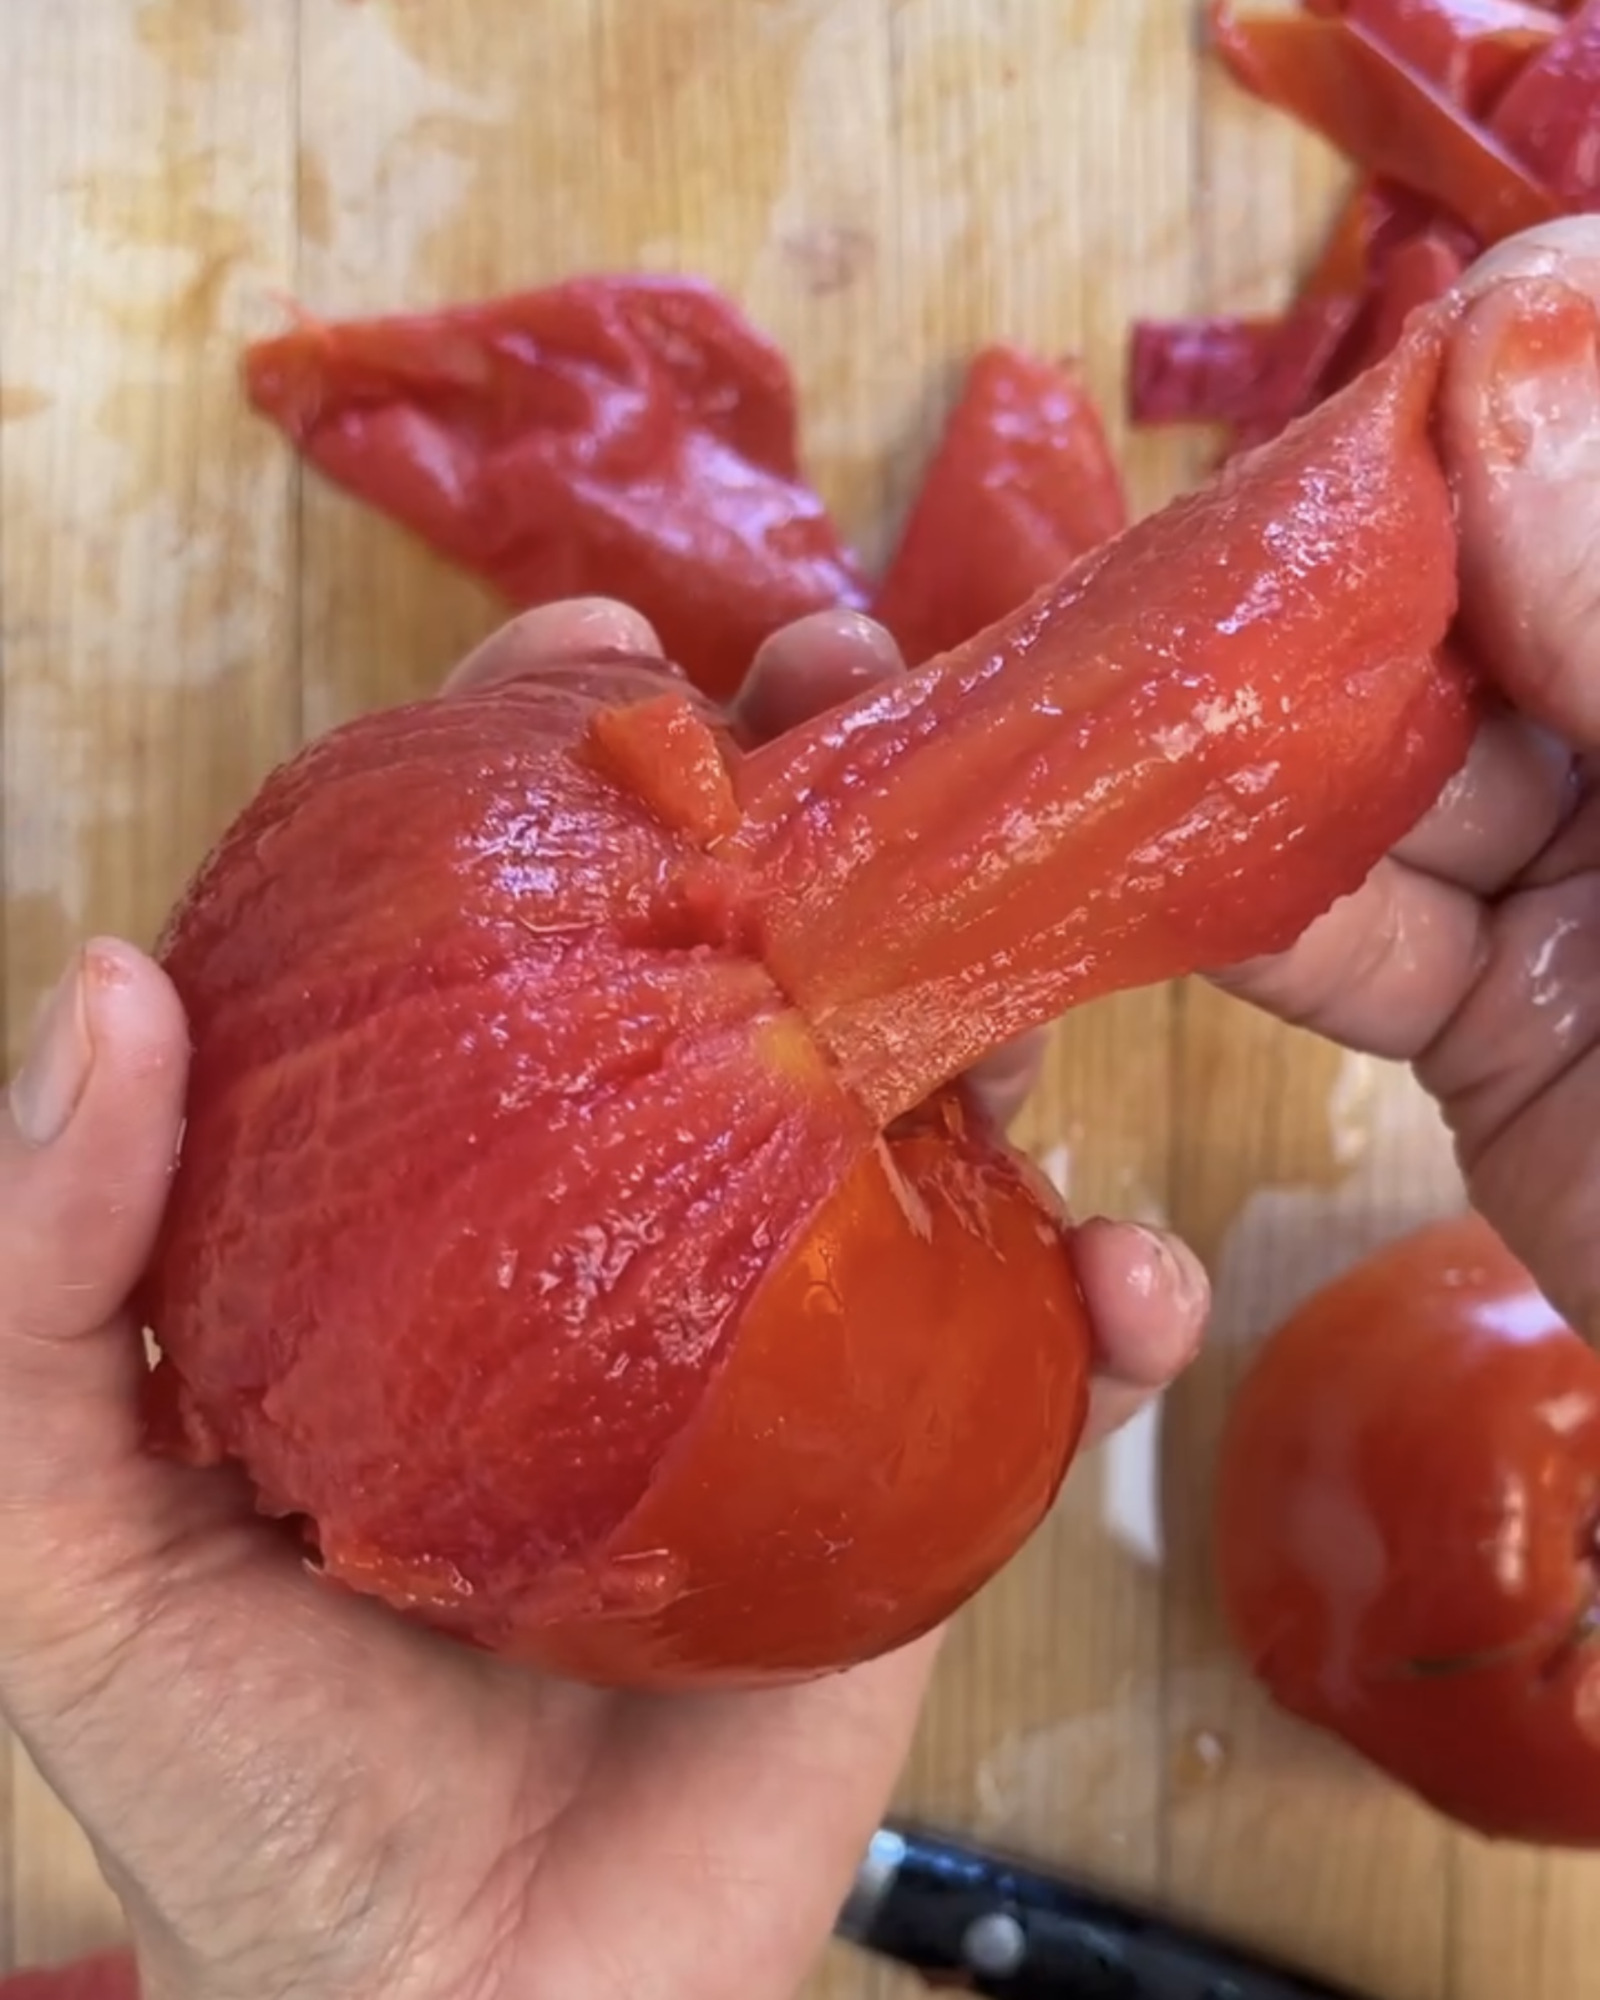 Fingers easily pull the skin off of a blanched tomato